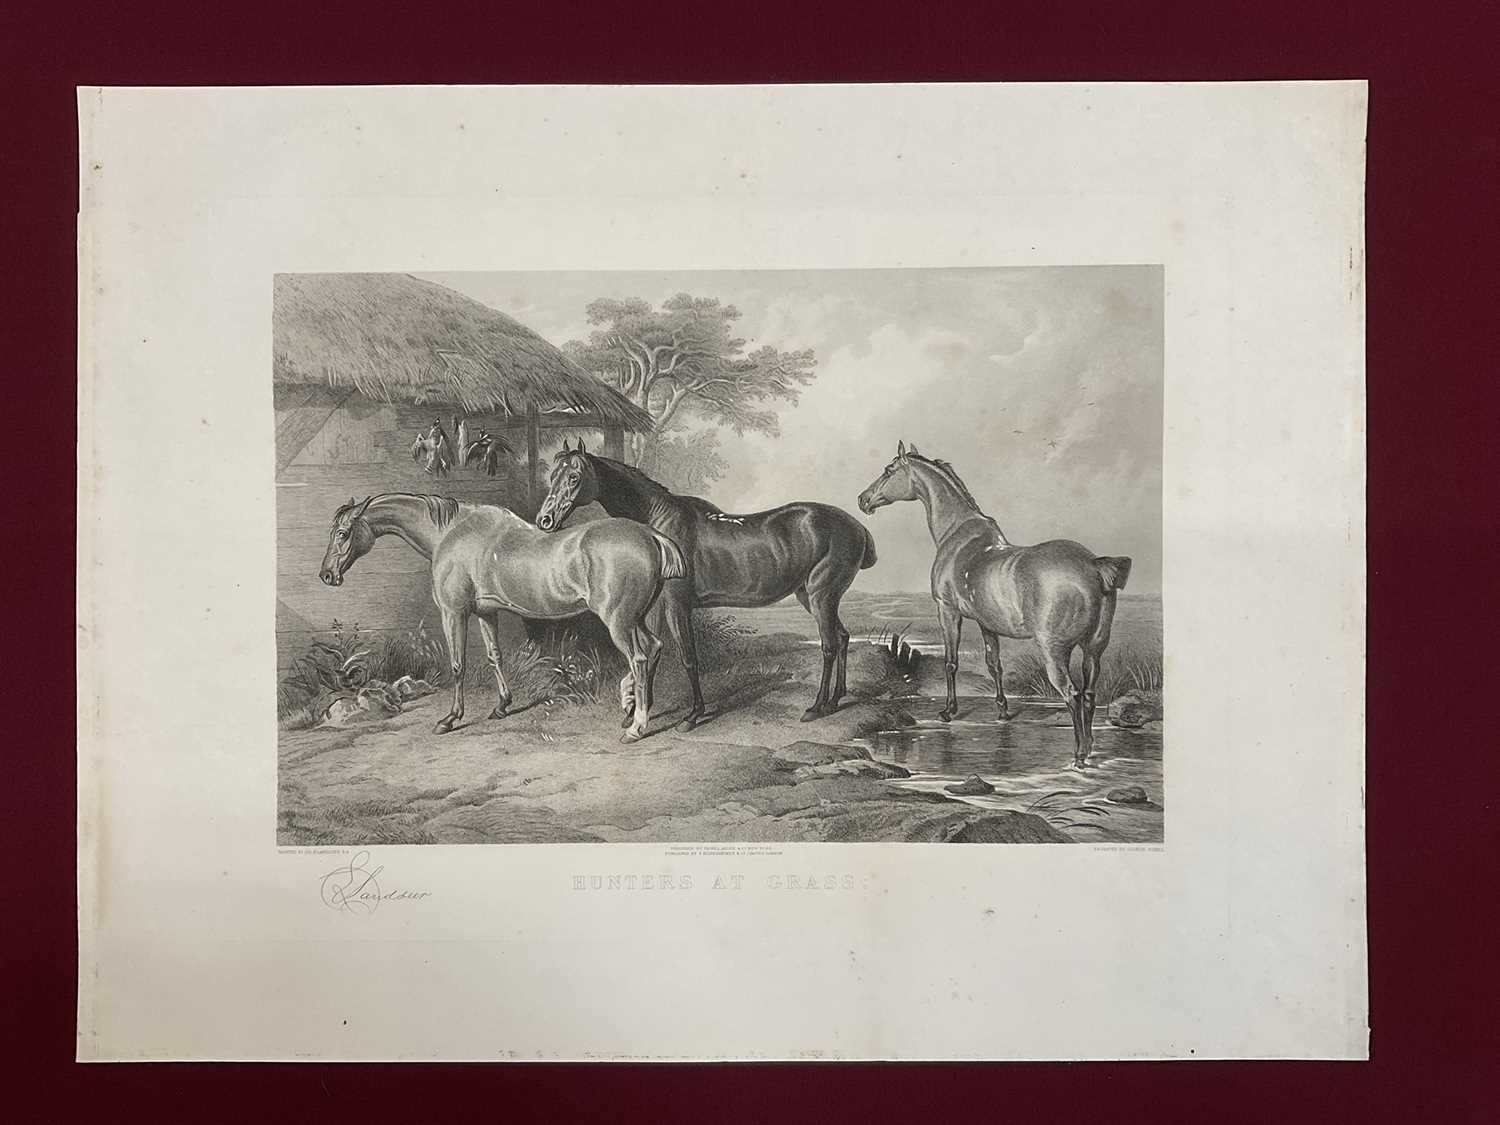 19th century engraving by George Zobel after Sir Edwin Landseer - Hunters at Grass, published by Fis